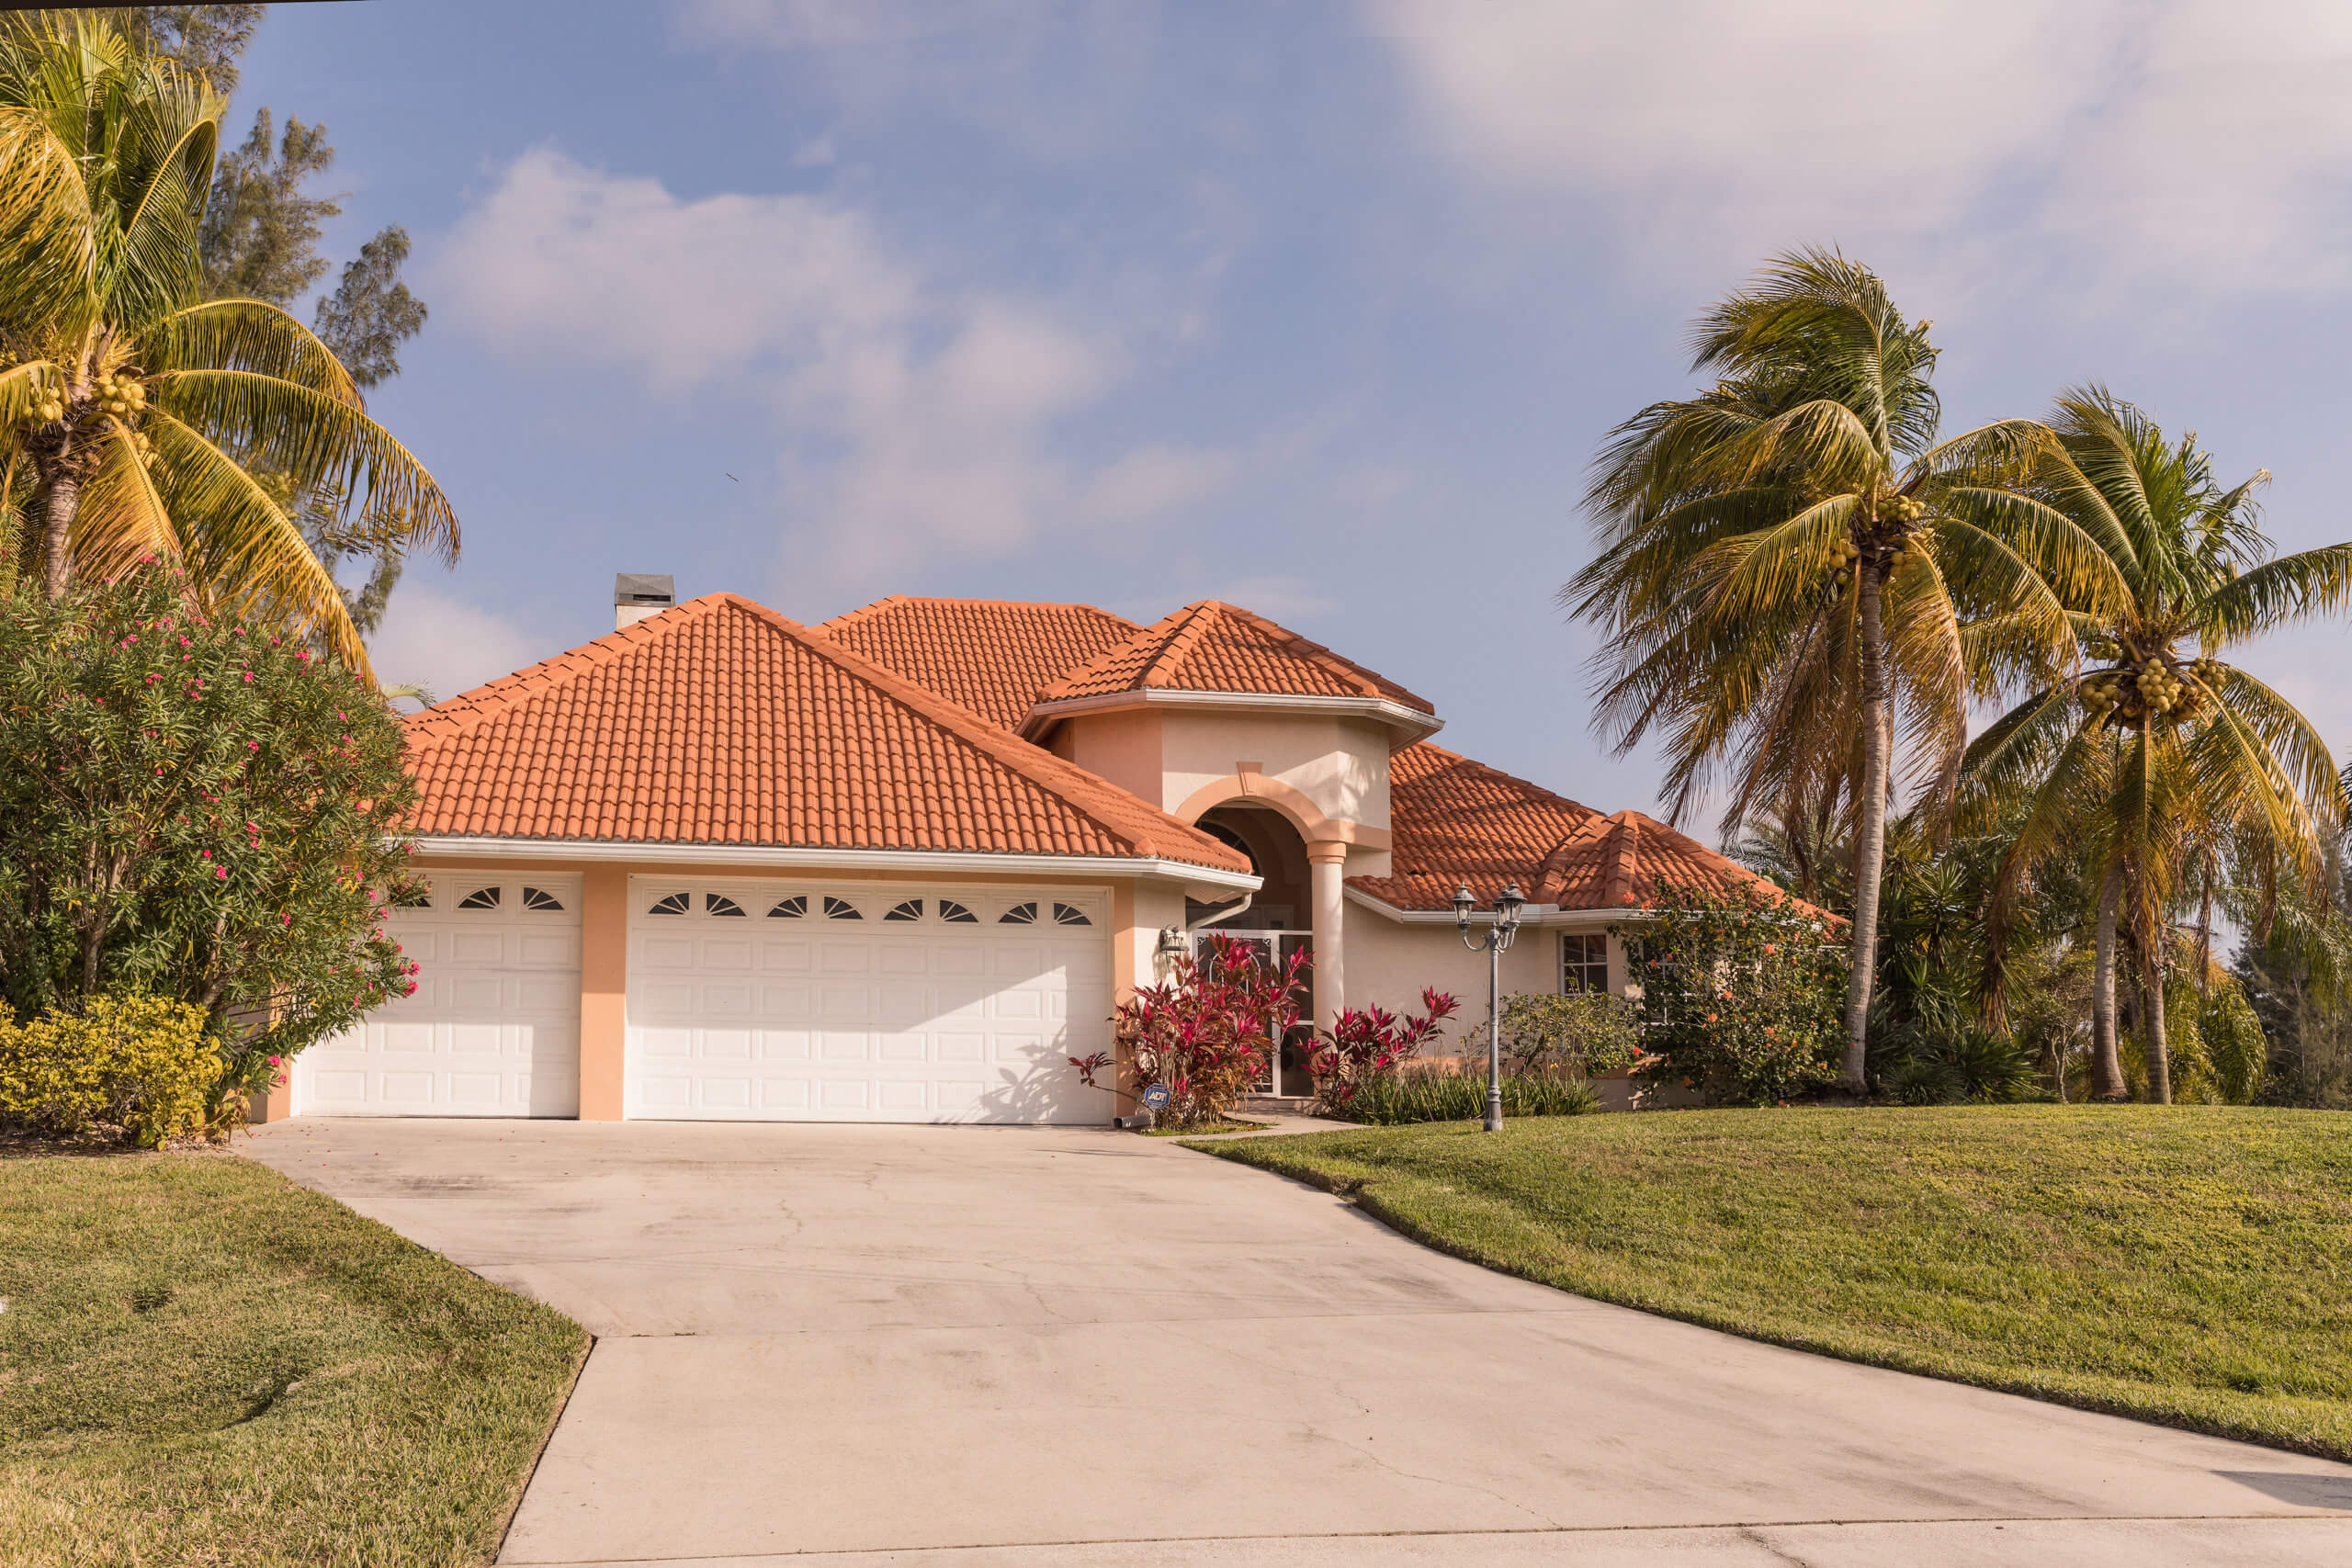 waterproofing your property Typical Southwest Florida concrete block and stucco home in the countryside with palm trees, tropical plants and flowers, grass lawn and pine trees. Florida. South Florida single family house